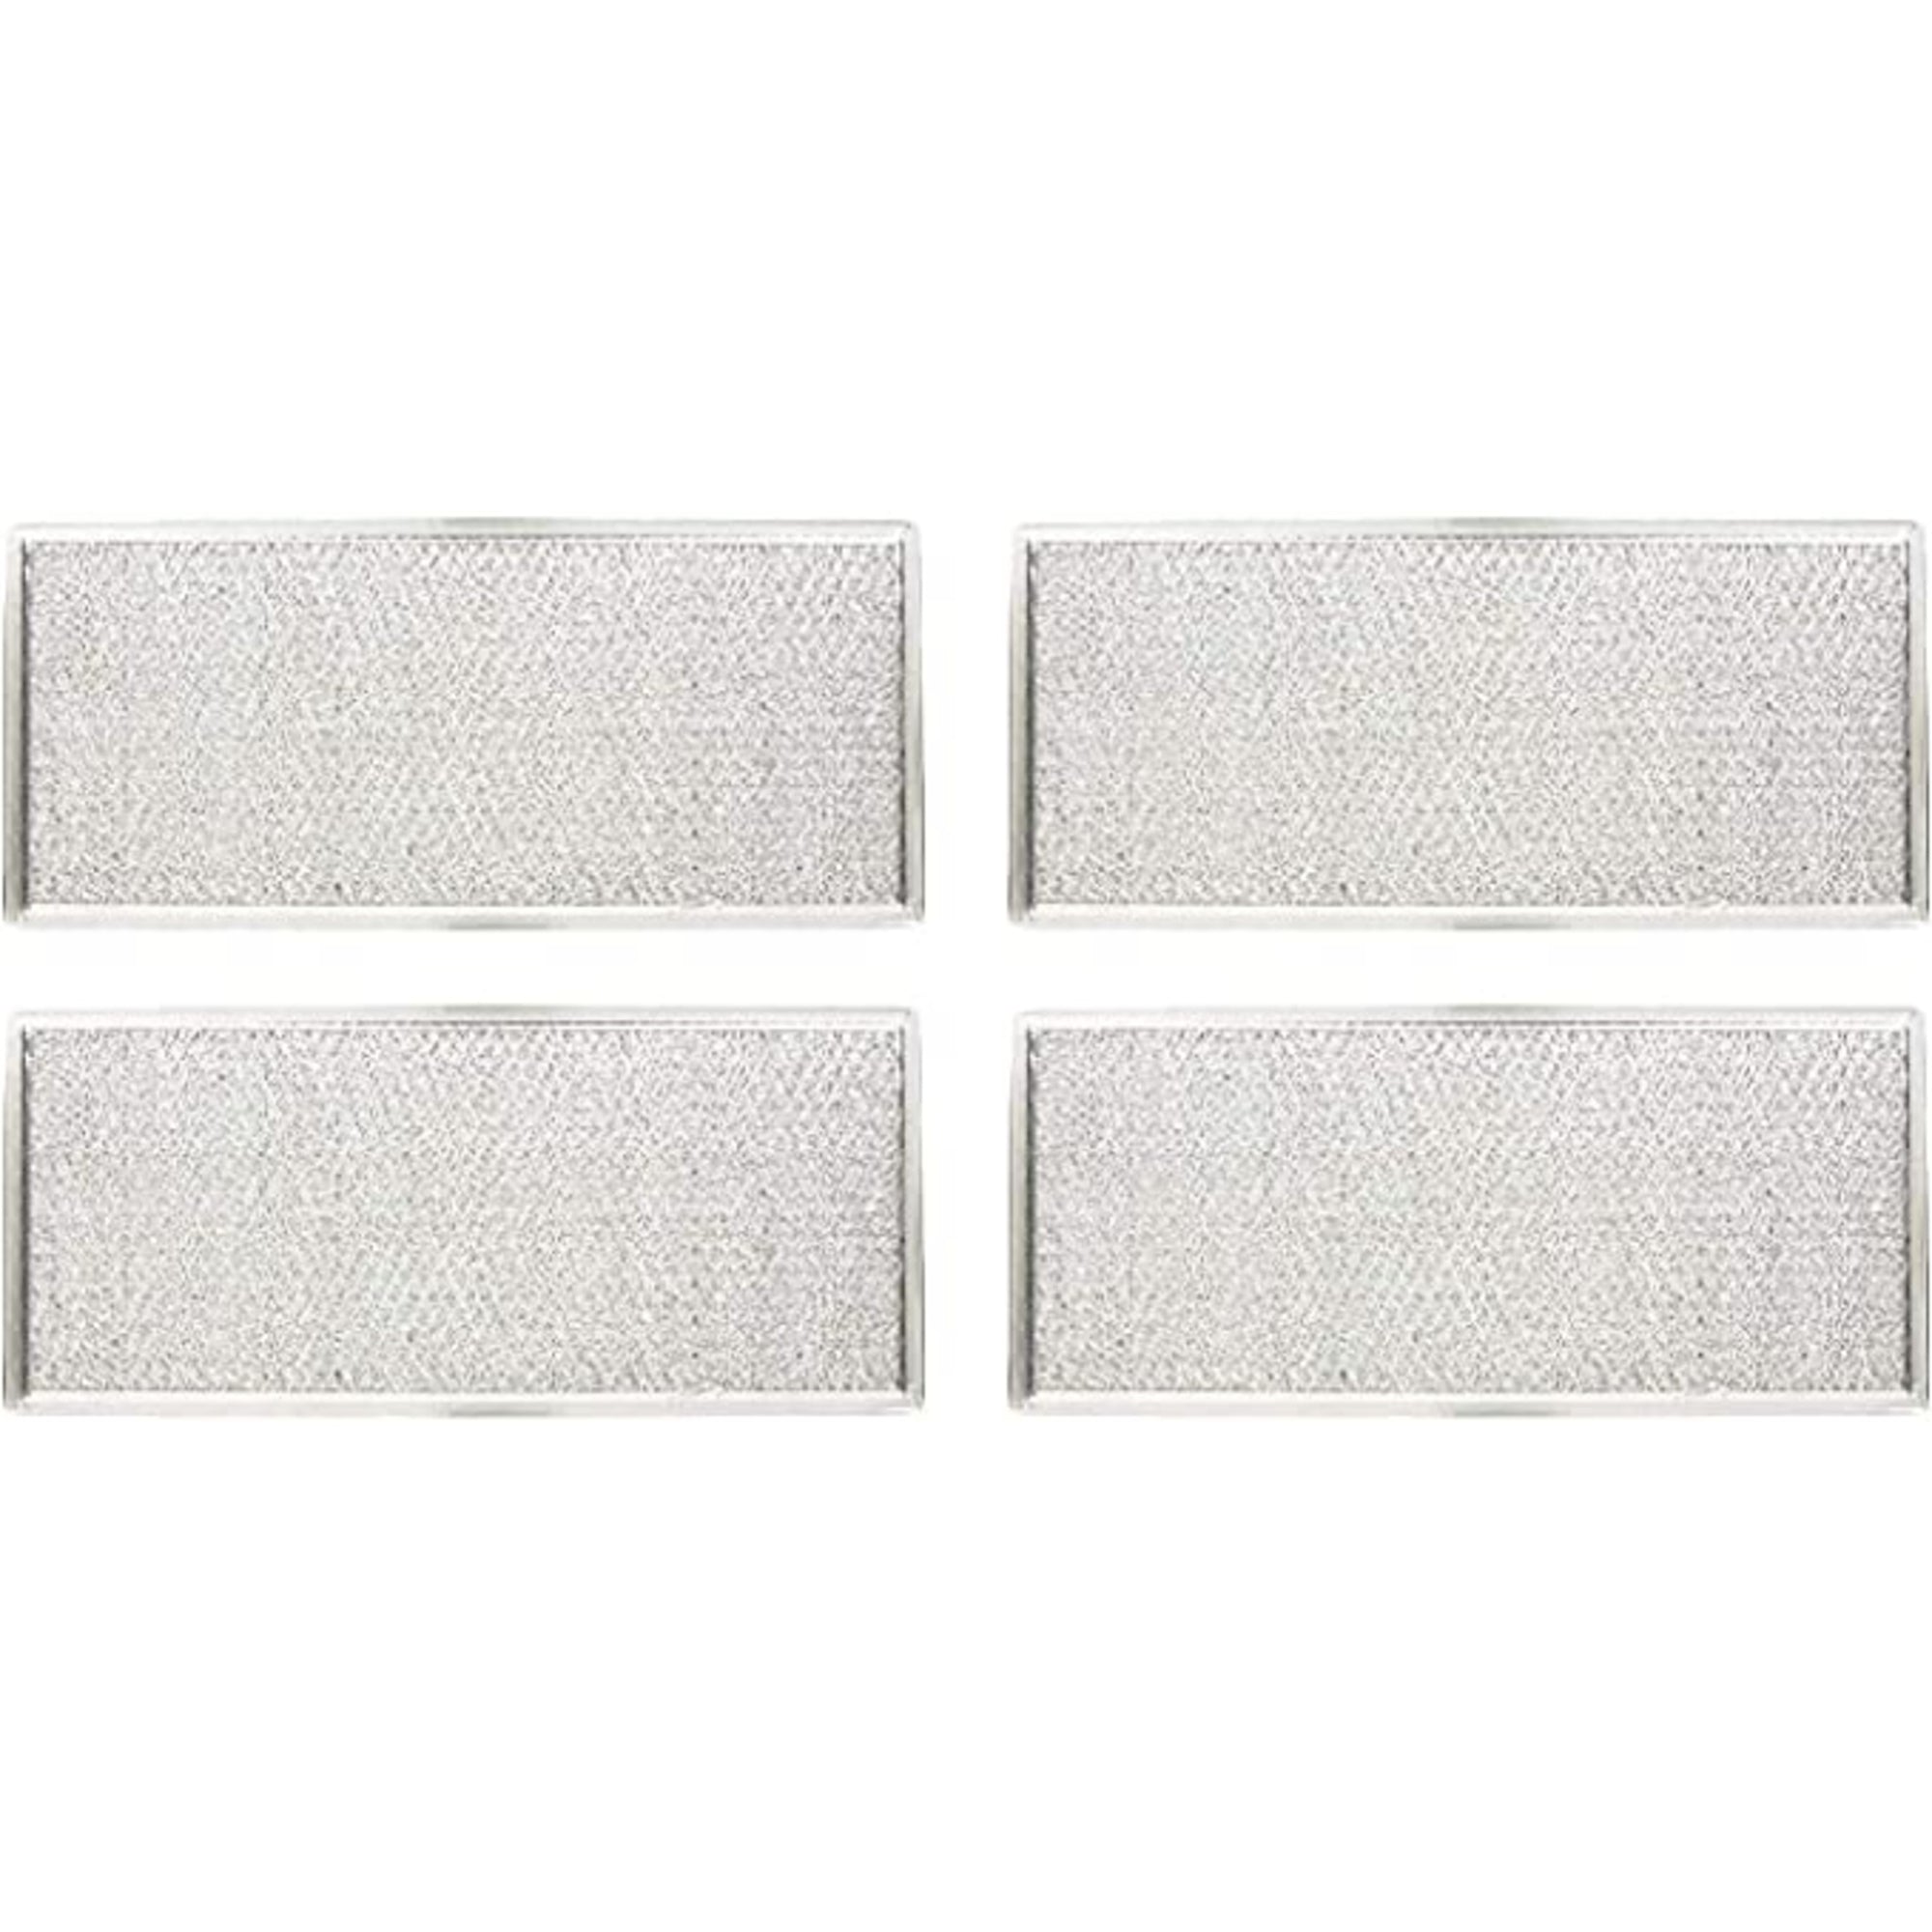 Nispira Replacement Microwave Filter for Range Hood Whirlpool W10208631A